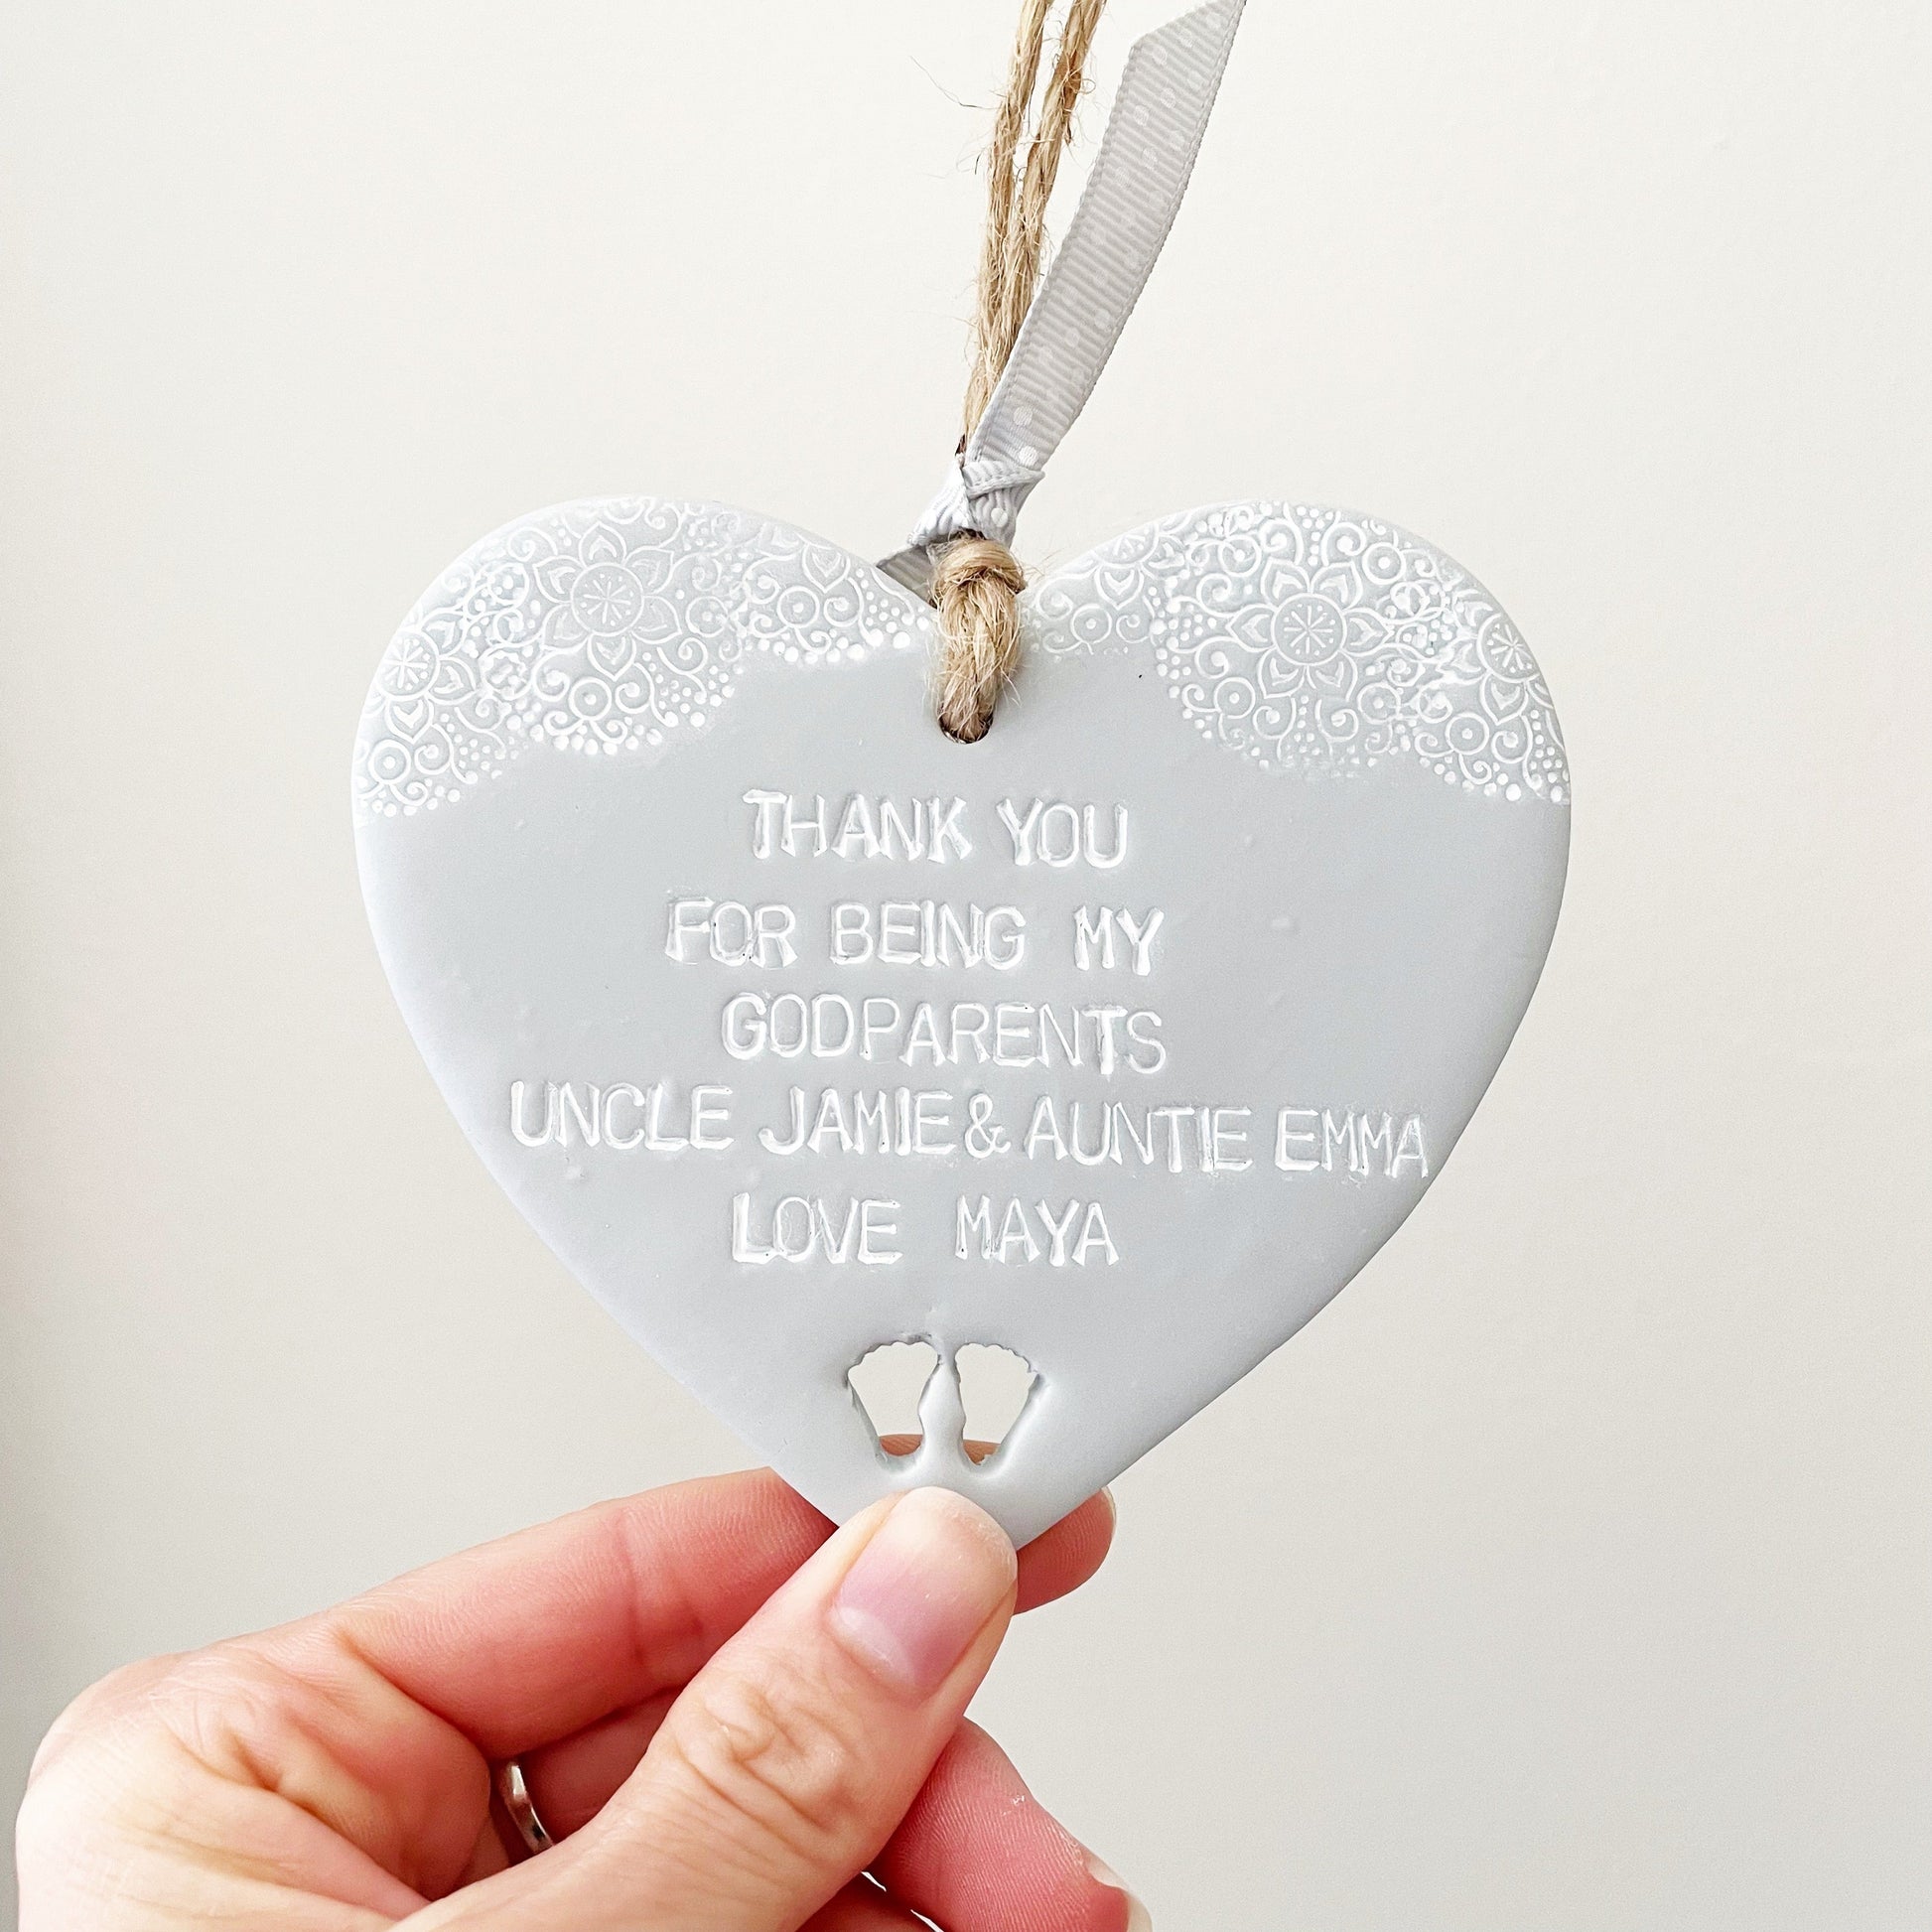 Personalised Godparent gift, grey clay hanging heart with baby feet cut out of the bottom and white lace edge at the top of the heart, the heart is personalised with THANK YOU FOR BEING MY GODPARENTS UNCLE JAMIE & AUNTIE EMMA LOVE MAYA